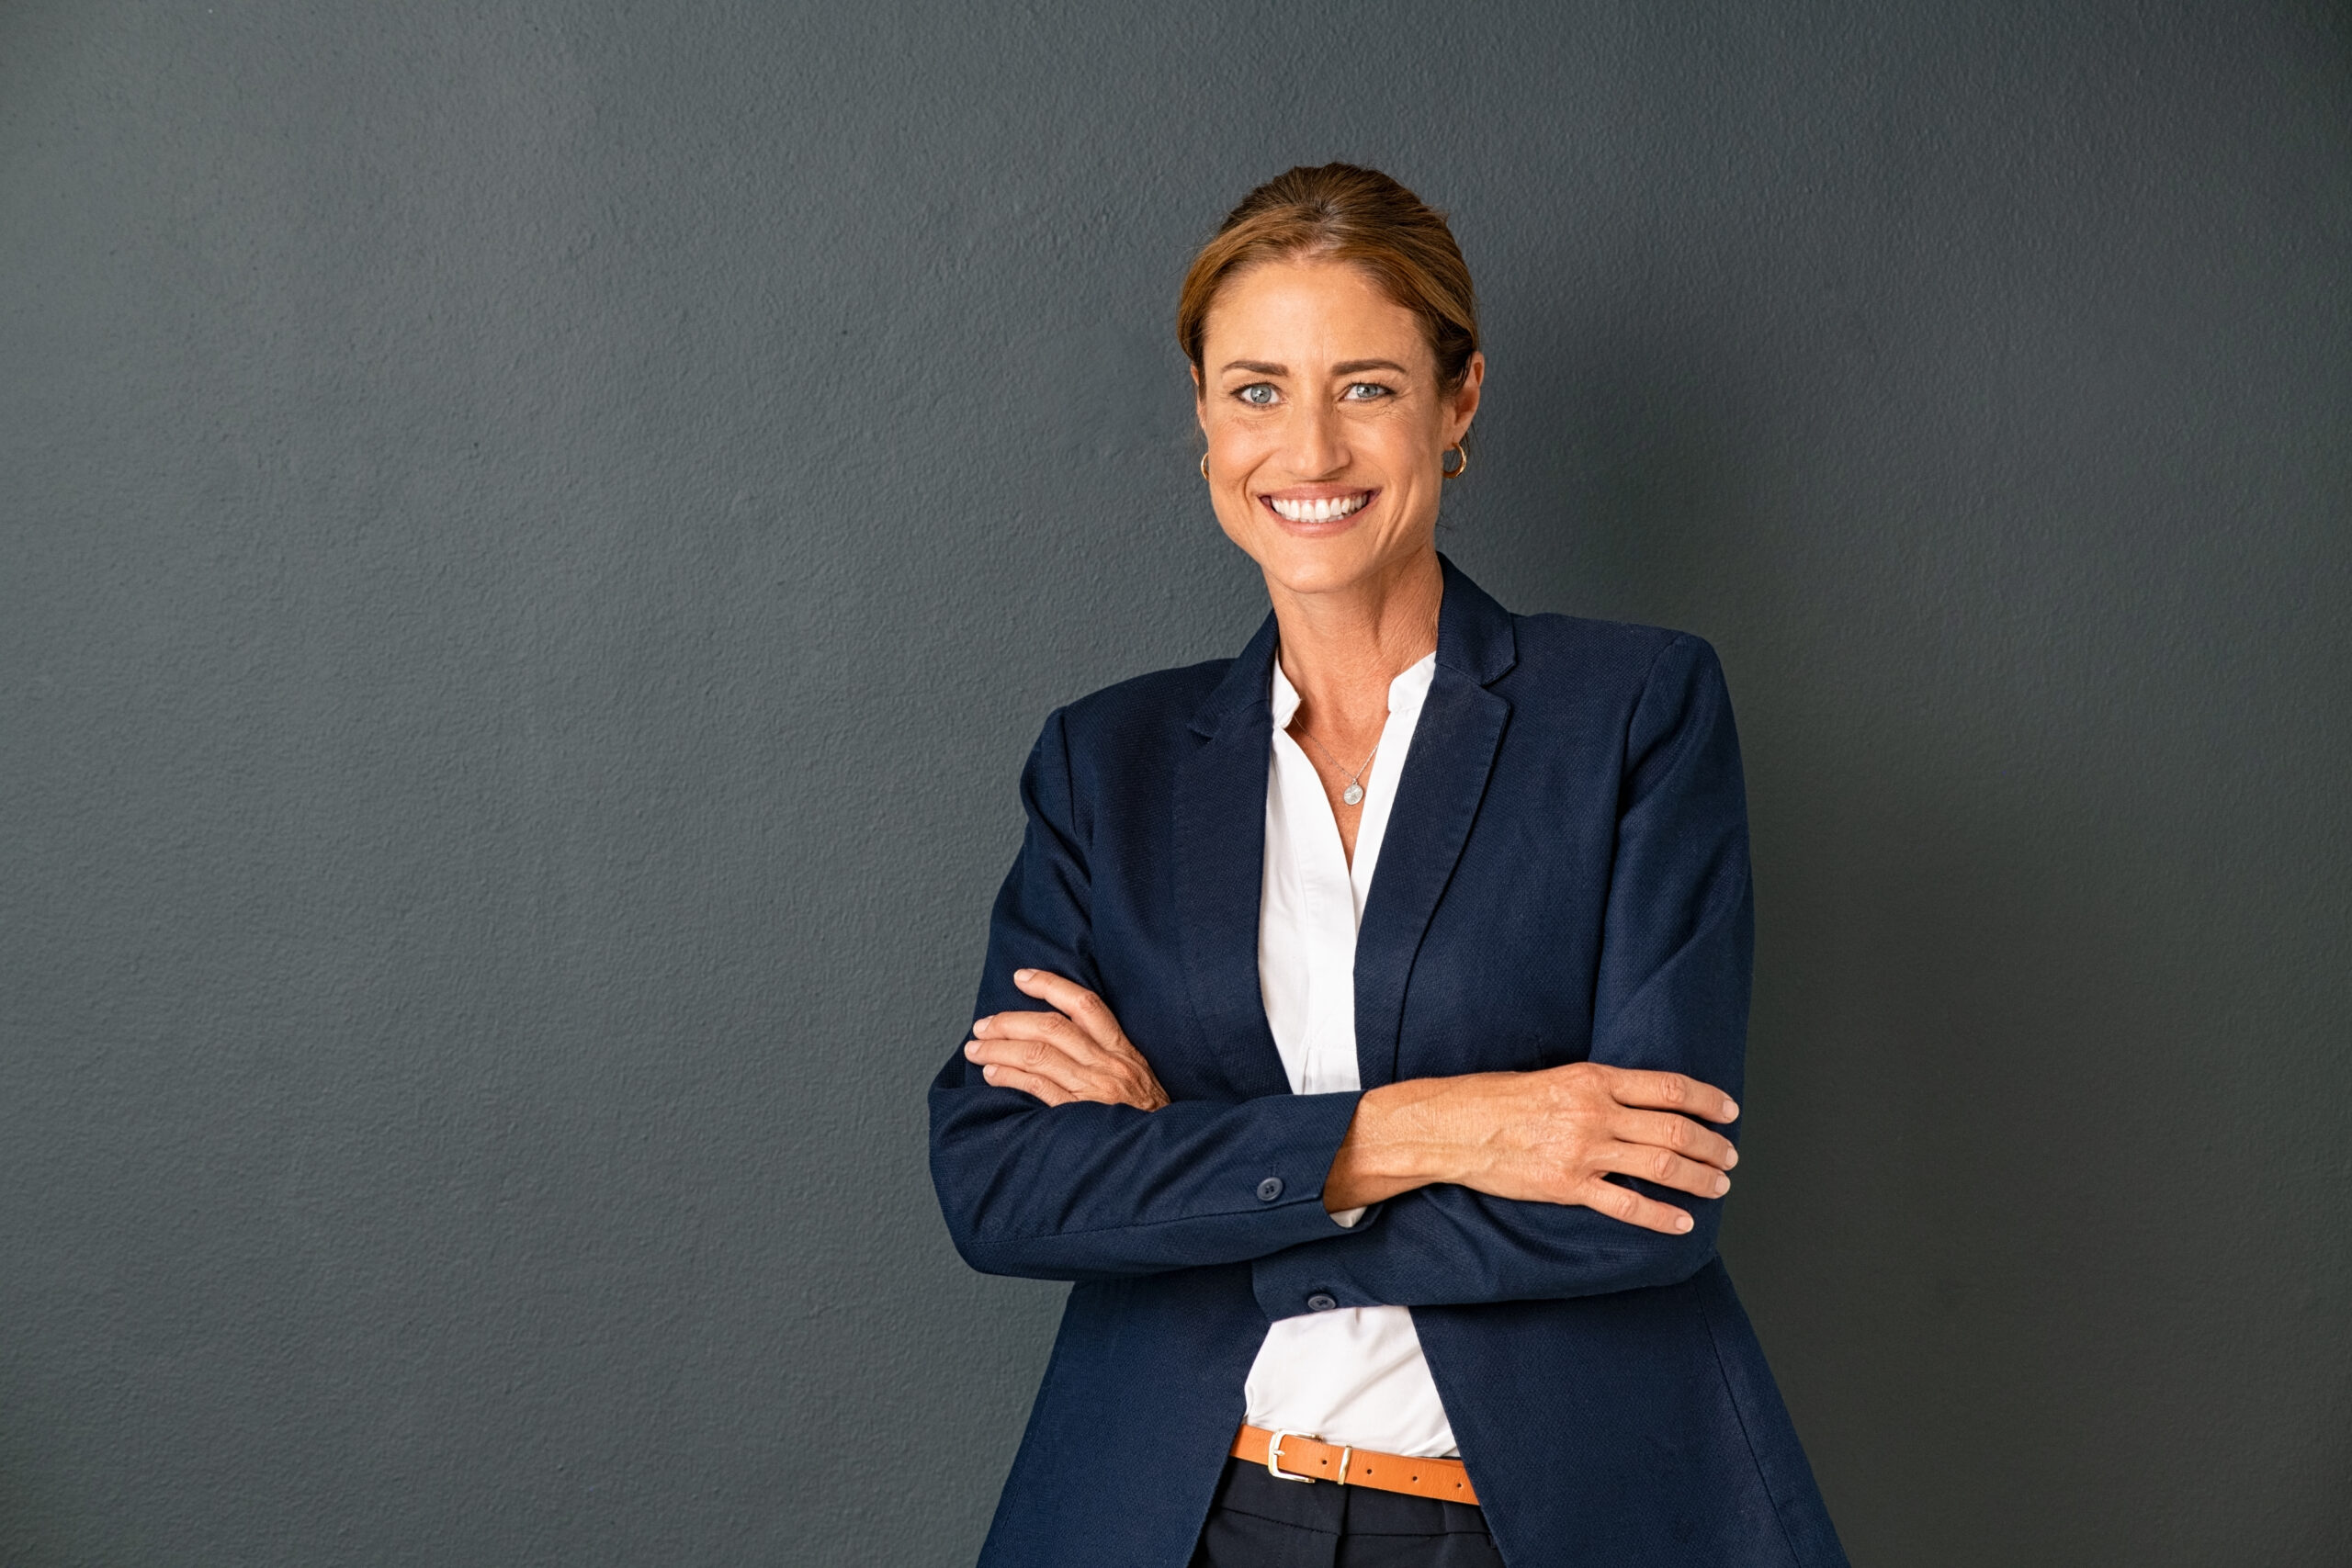 business woman standing confidently against grey background